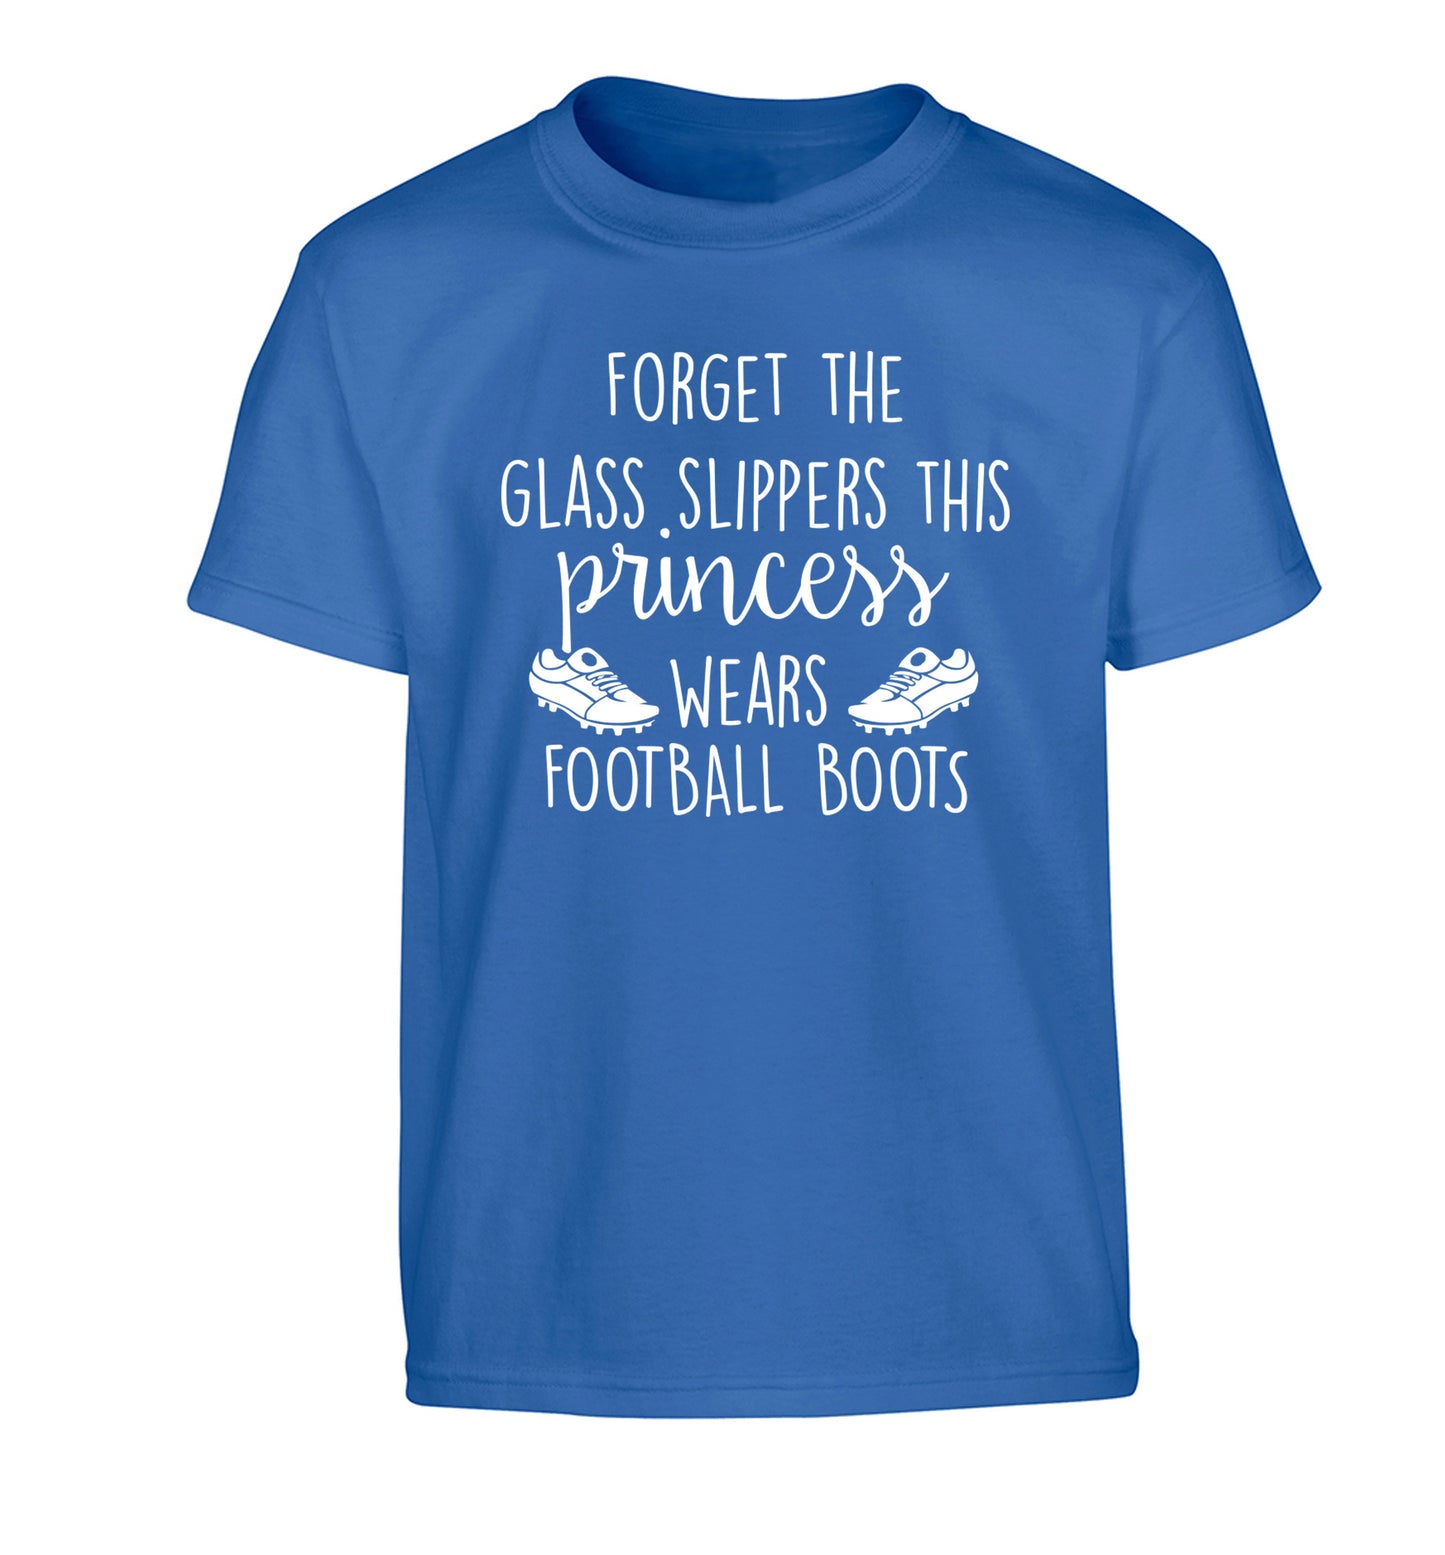 Forget the glass slippers this princess wears football boots Children's blue Tshirt 12-14 Years